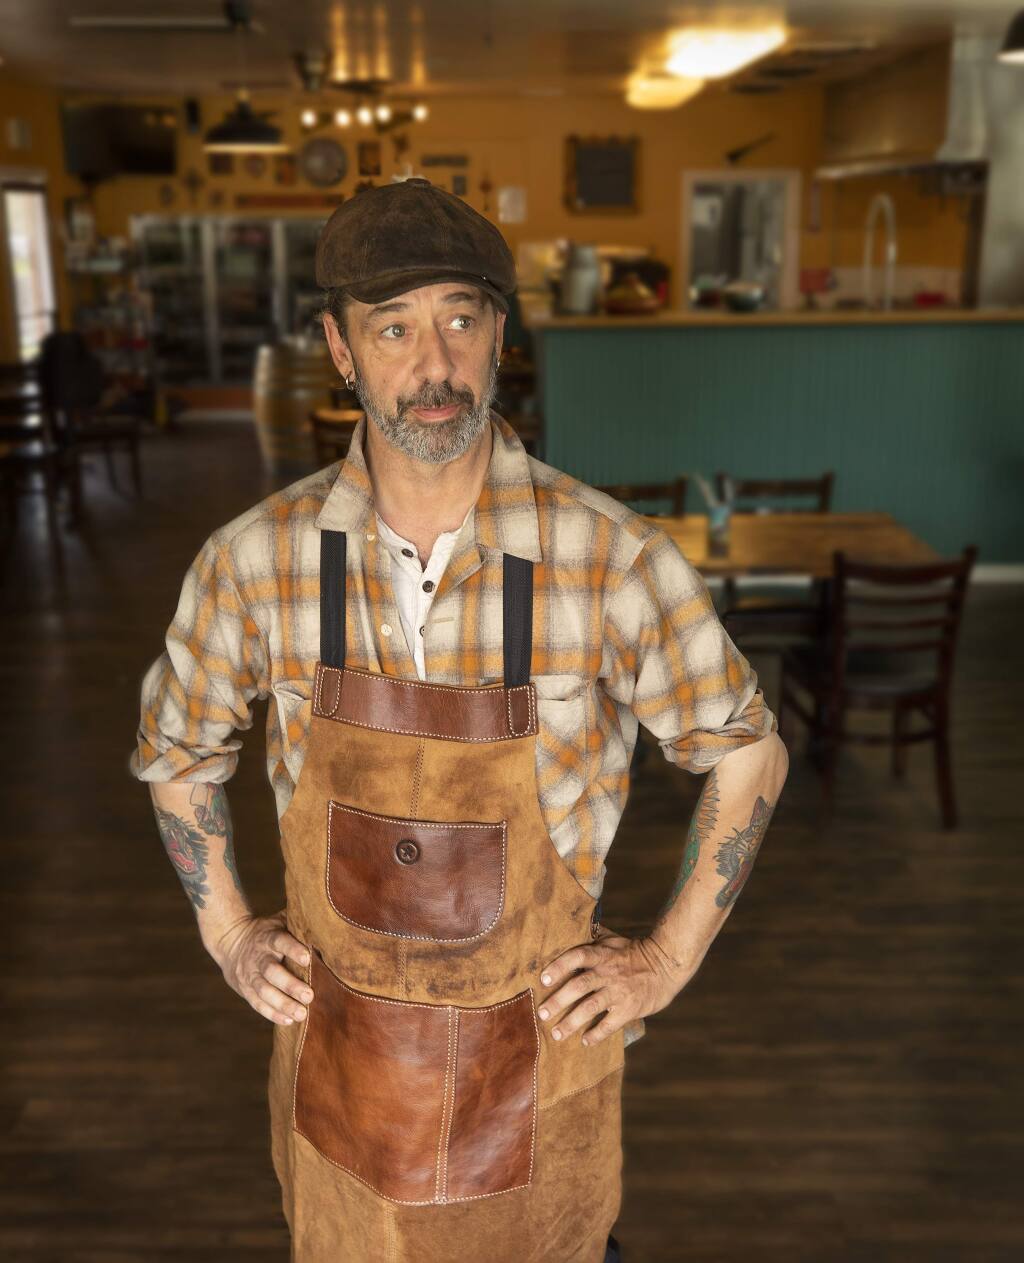 Butcher Crown Roadhouse owner/chef and pretty much anything else Pete Schnell. (photo by John Burgess/The Press Democrat)